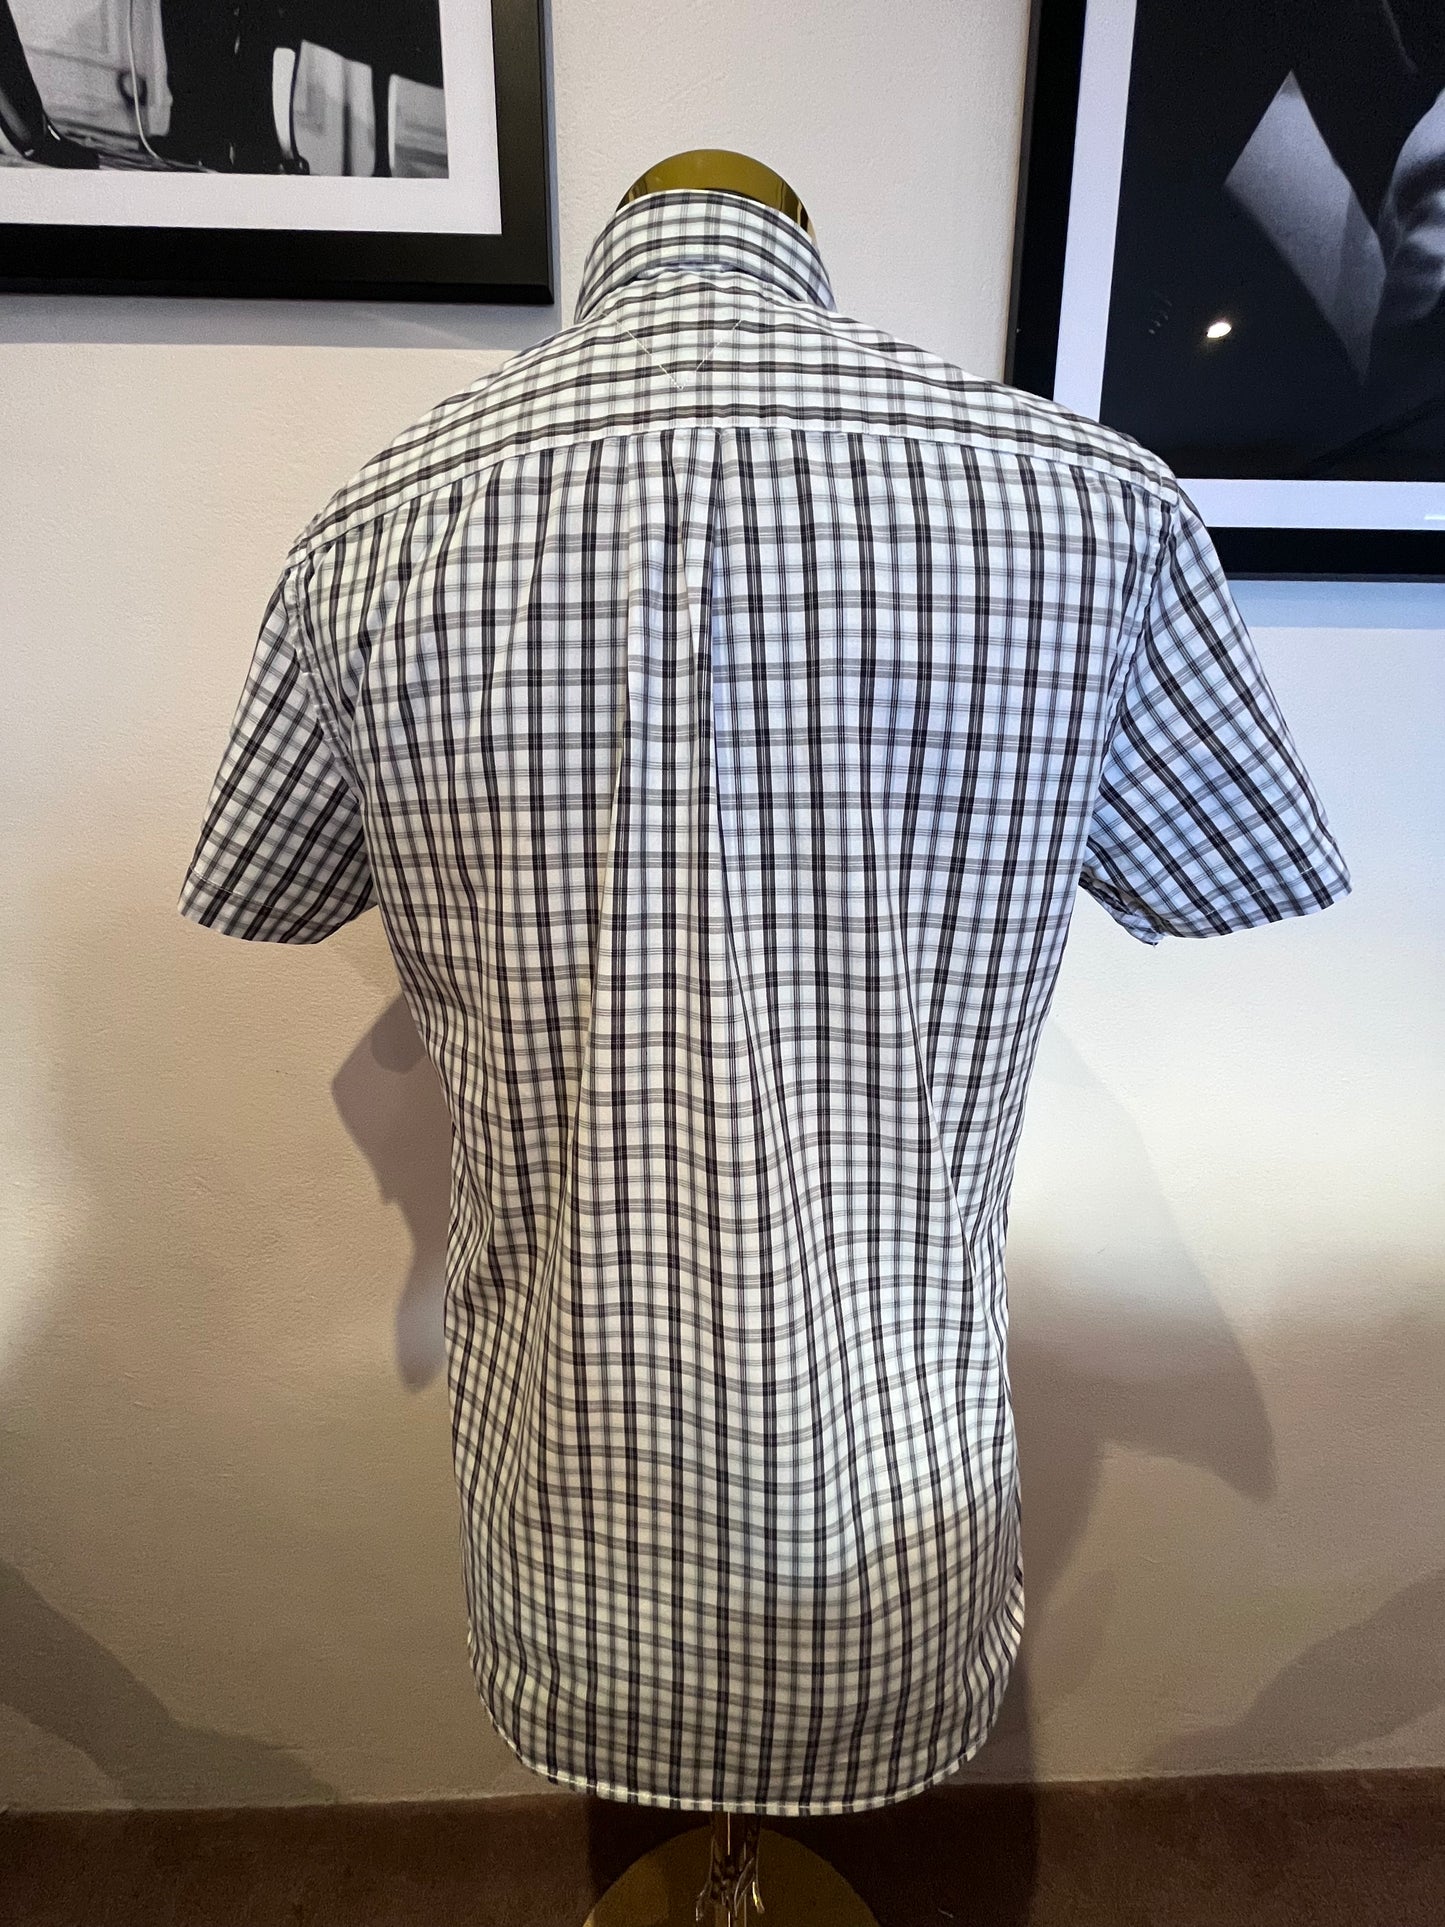 Tommy Hilfiger Custom Fit 100% Cotton Blue White Check Shirt Size Large